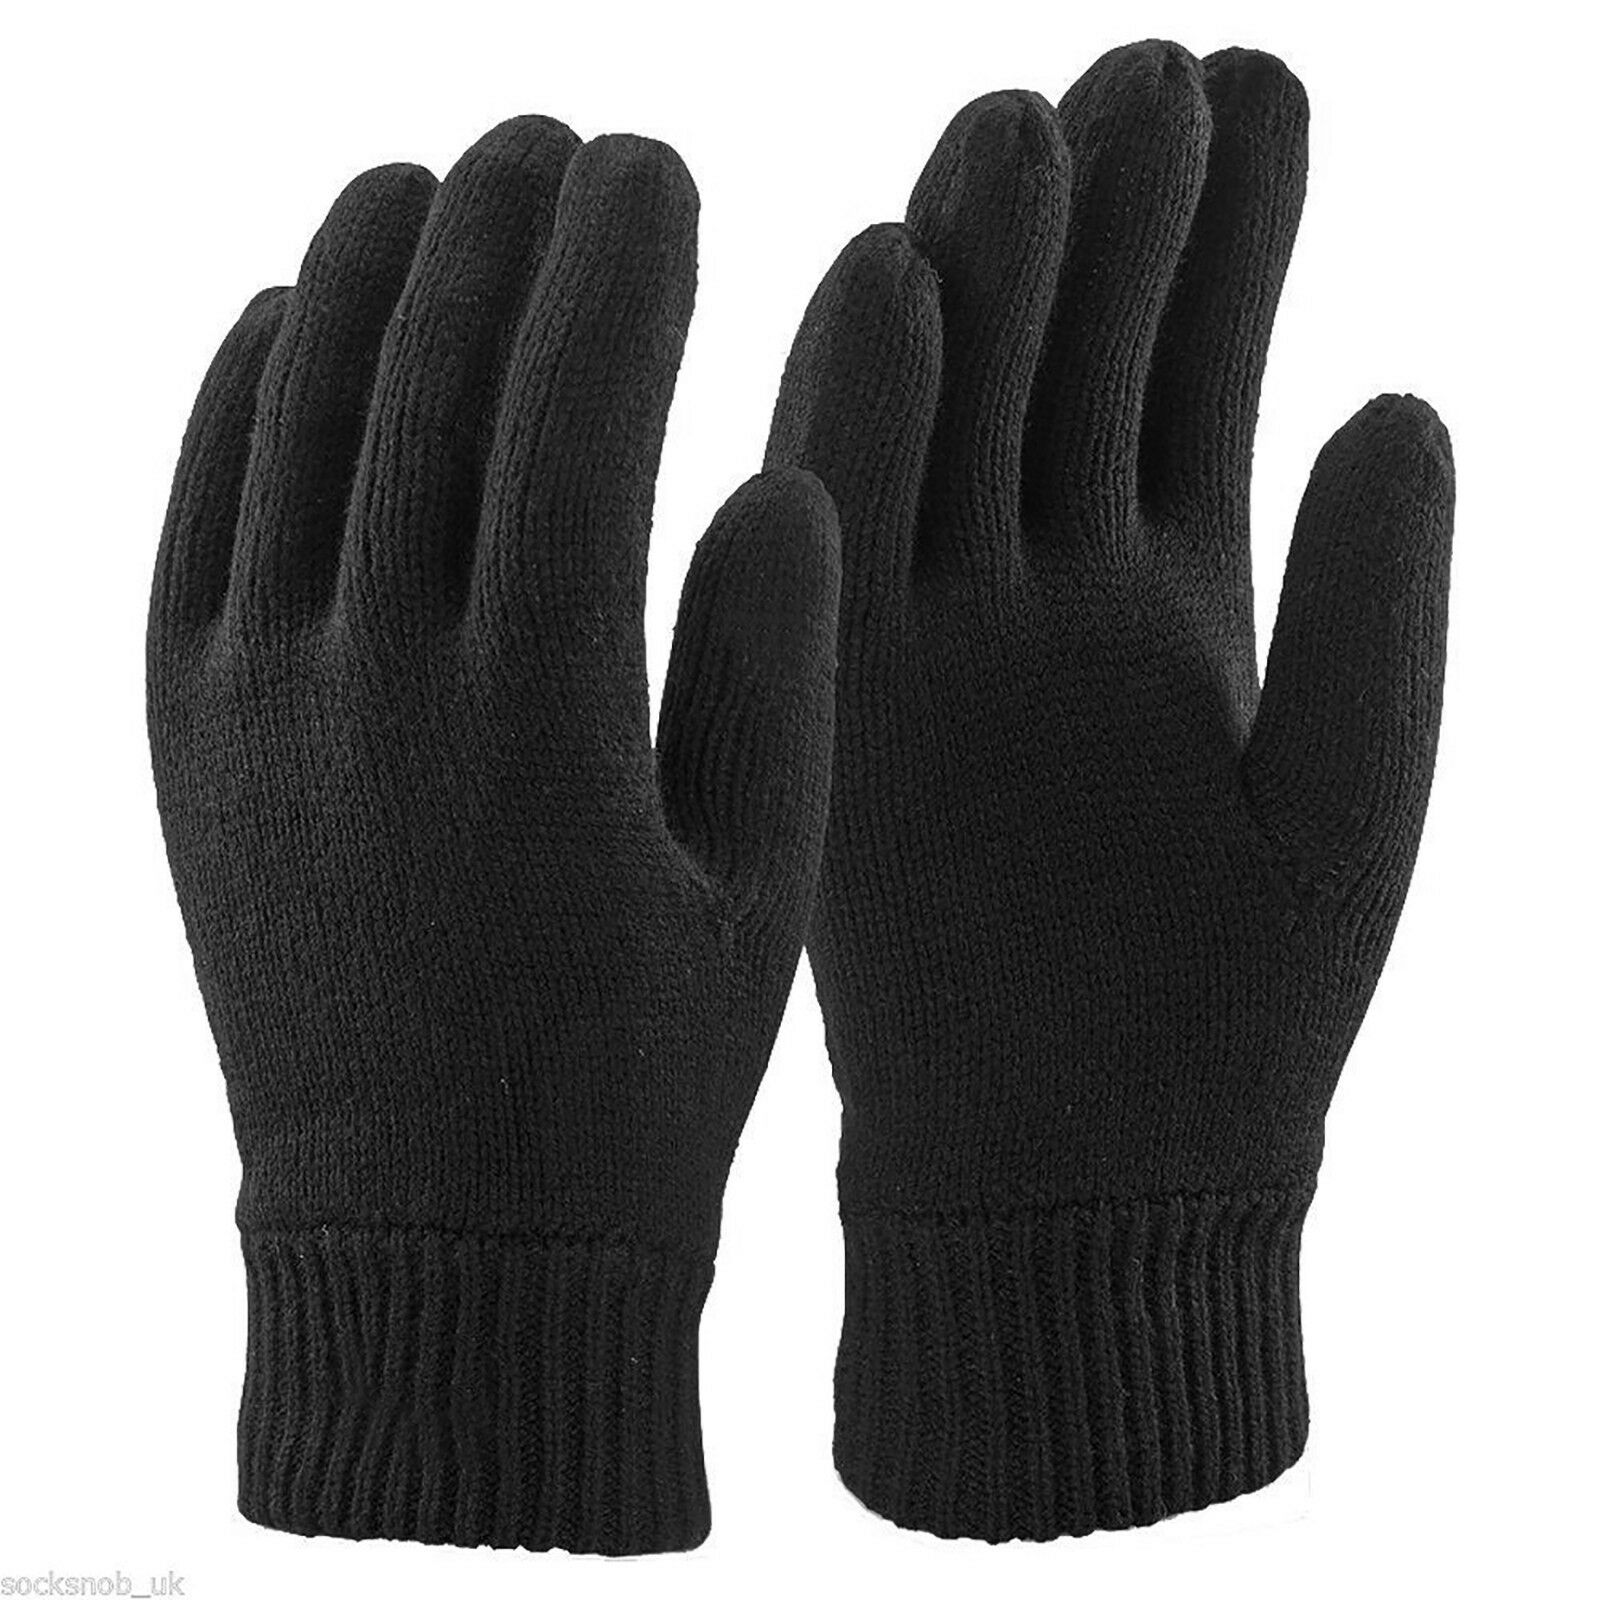 Mens 3m Black Thinsulate 40 Gram Thermal Lined Winter Warm Knit Gloves, 3 Sizes